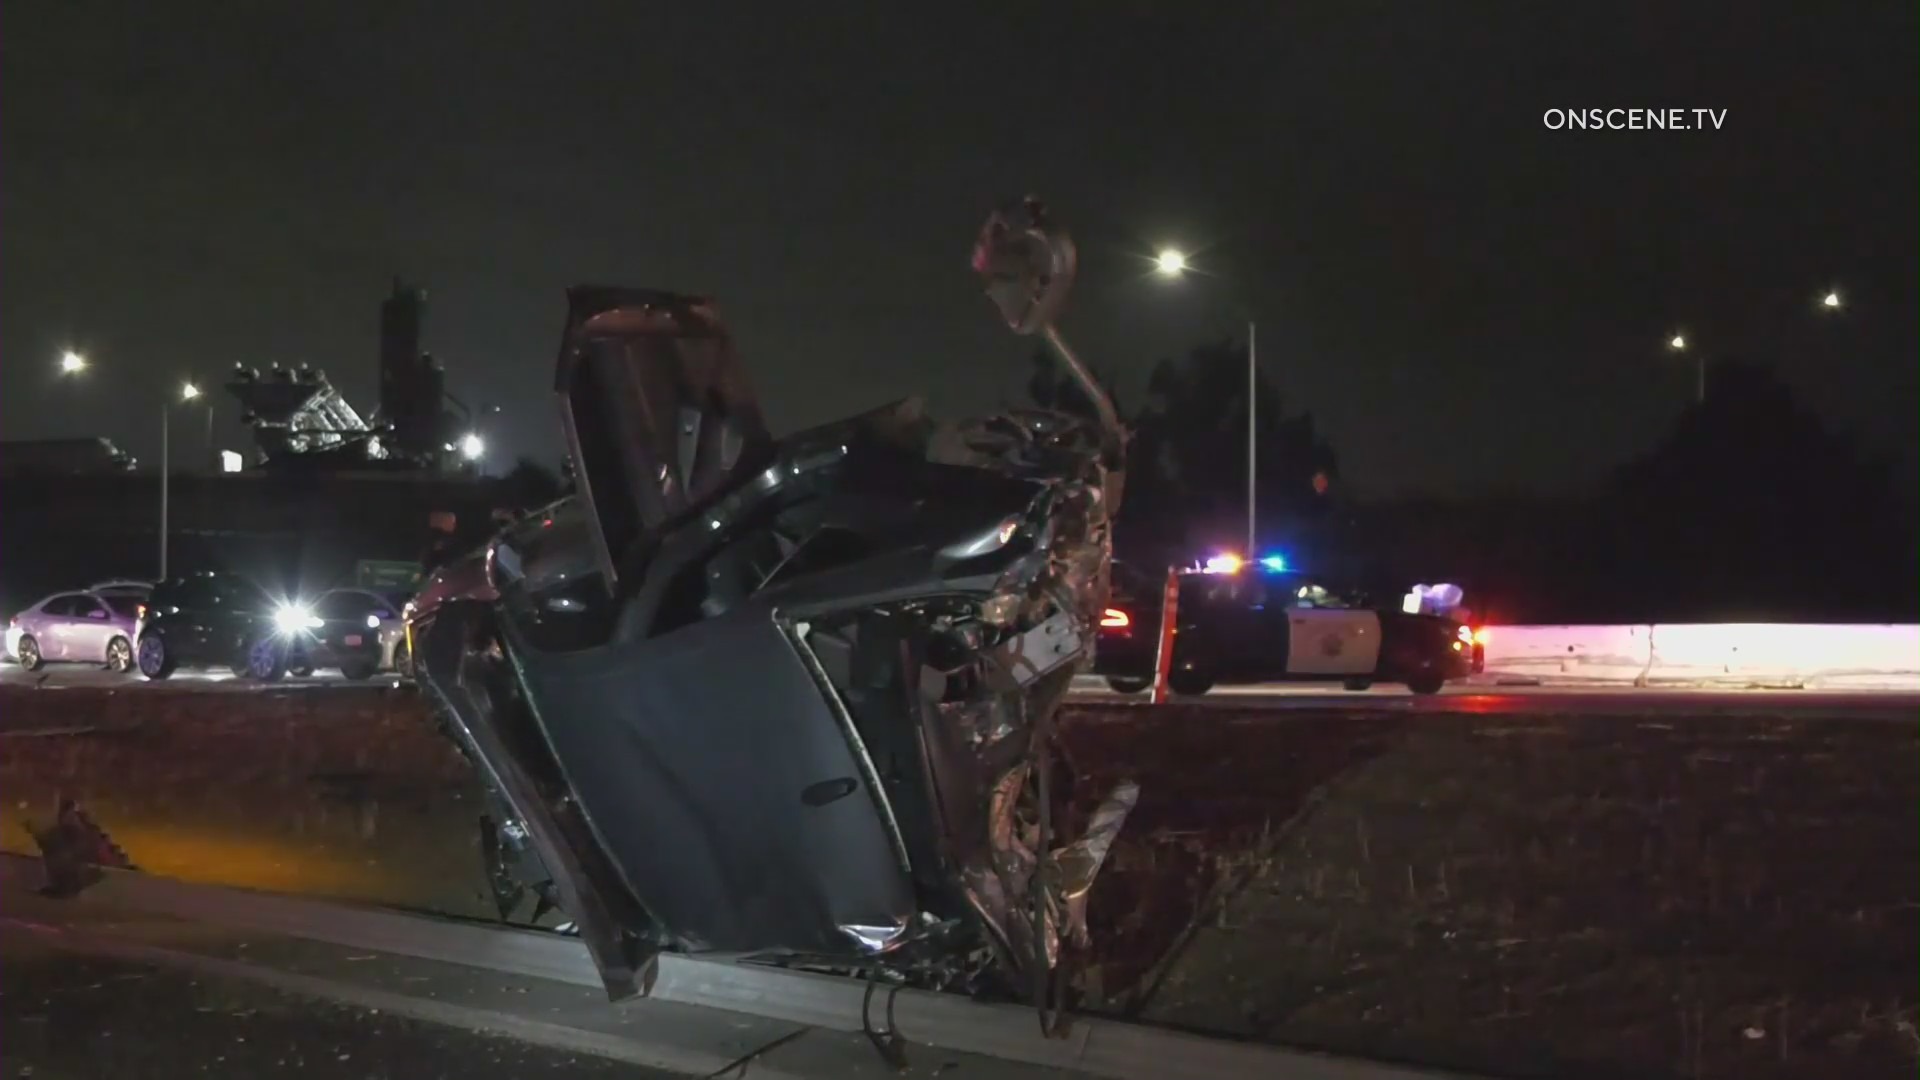 A severely damaged vehicle is seen after a deadly crash on the 10 Freeway in Pomona on Jan. 25, 2021. (Onscene.tv)